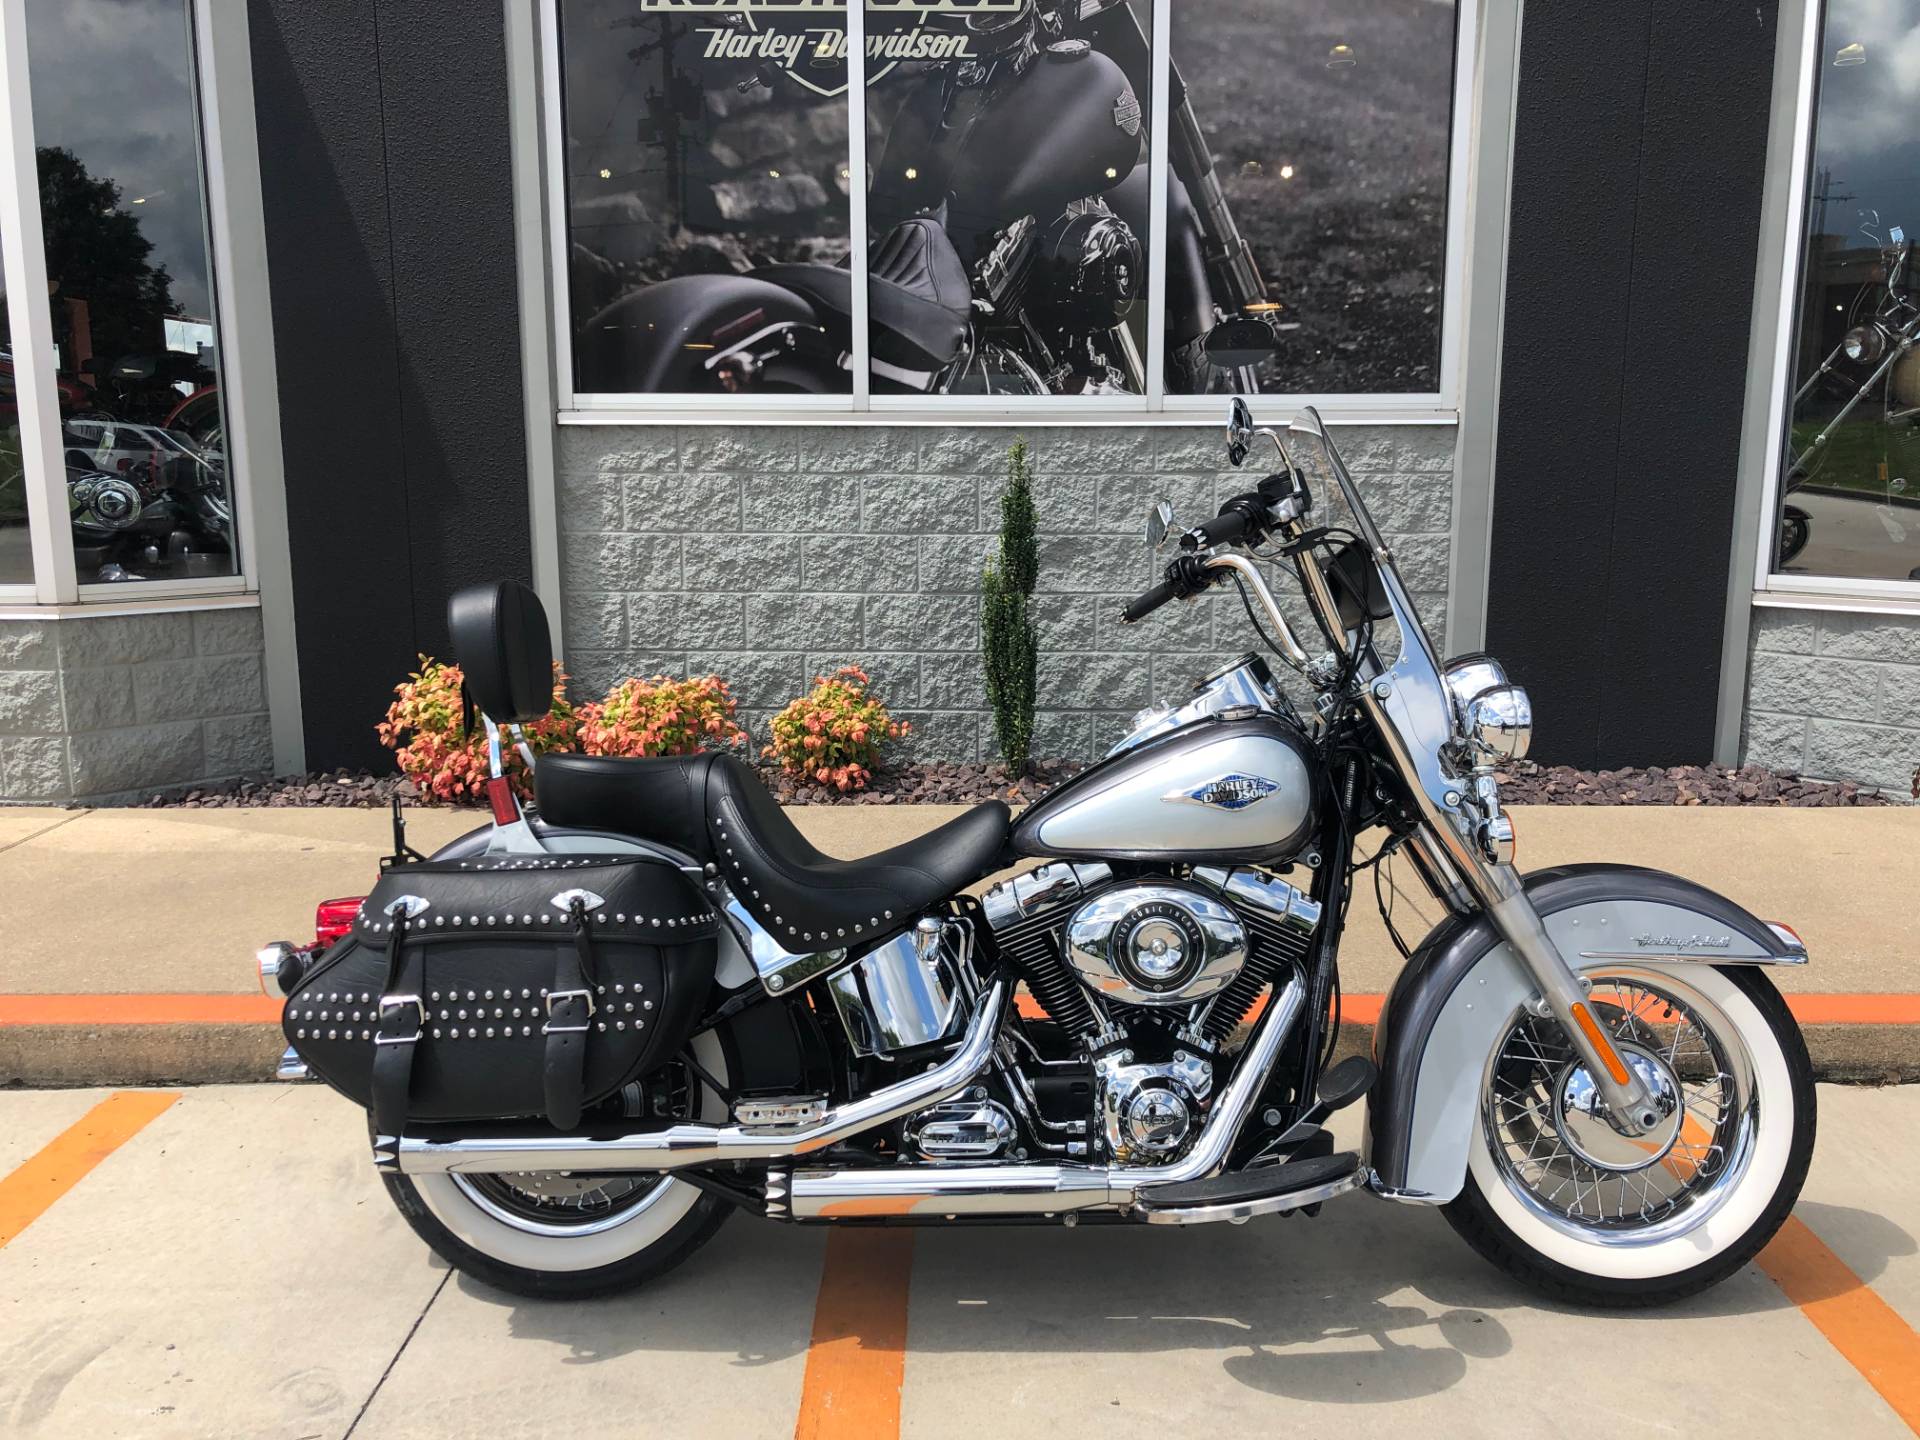 Used 2014 Harley Davidson Heritage Softail Classic Charcoal Pearl Brilliant Silver Pearl Motorcycles In Mount Vernon Il U031362